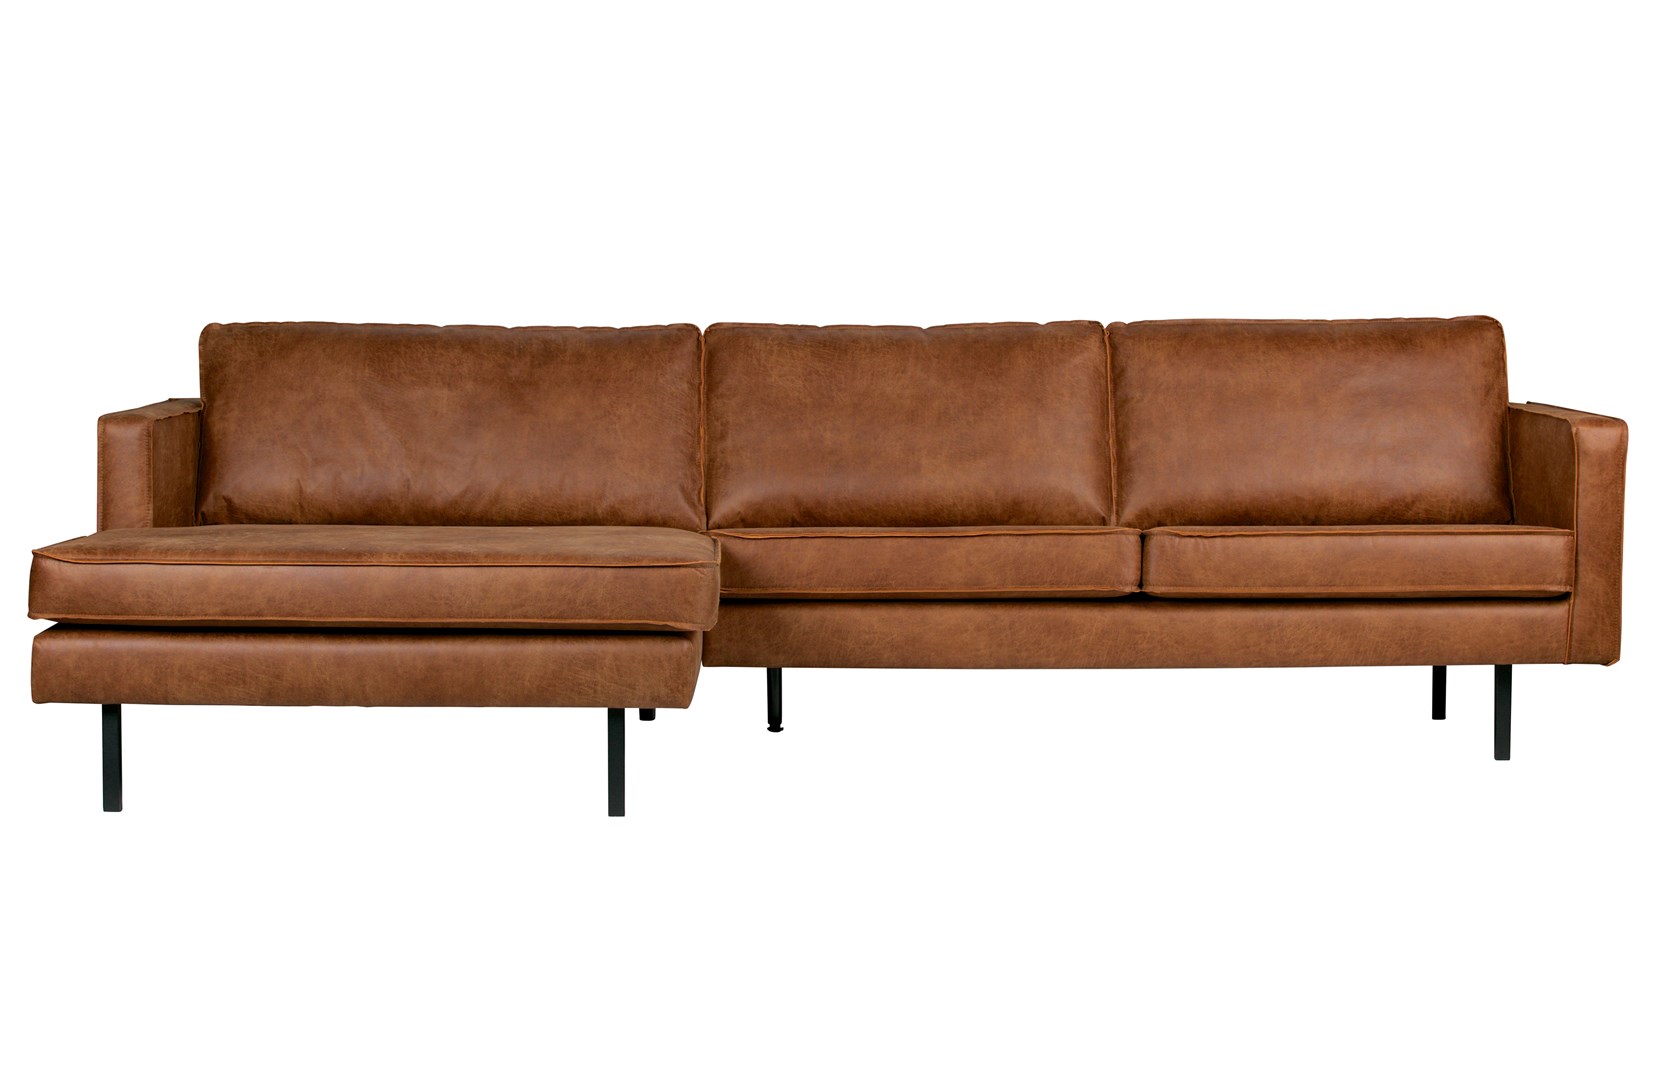 Betere Rodeo bank als 3-zits bank met chaise longue - eLiving NQ-63